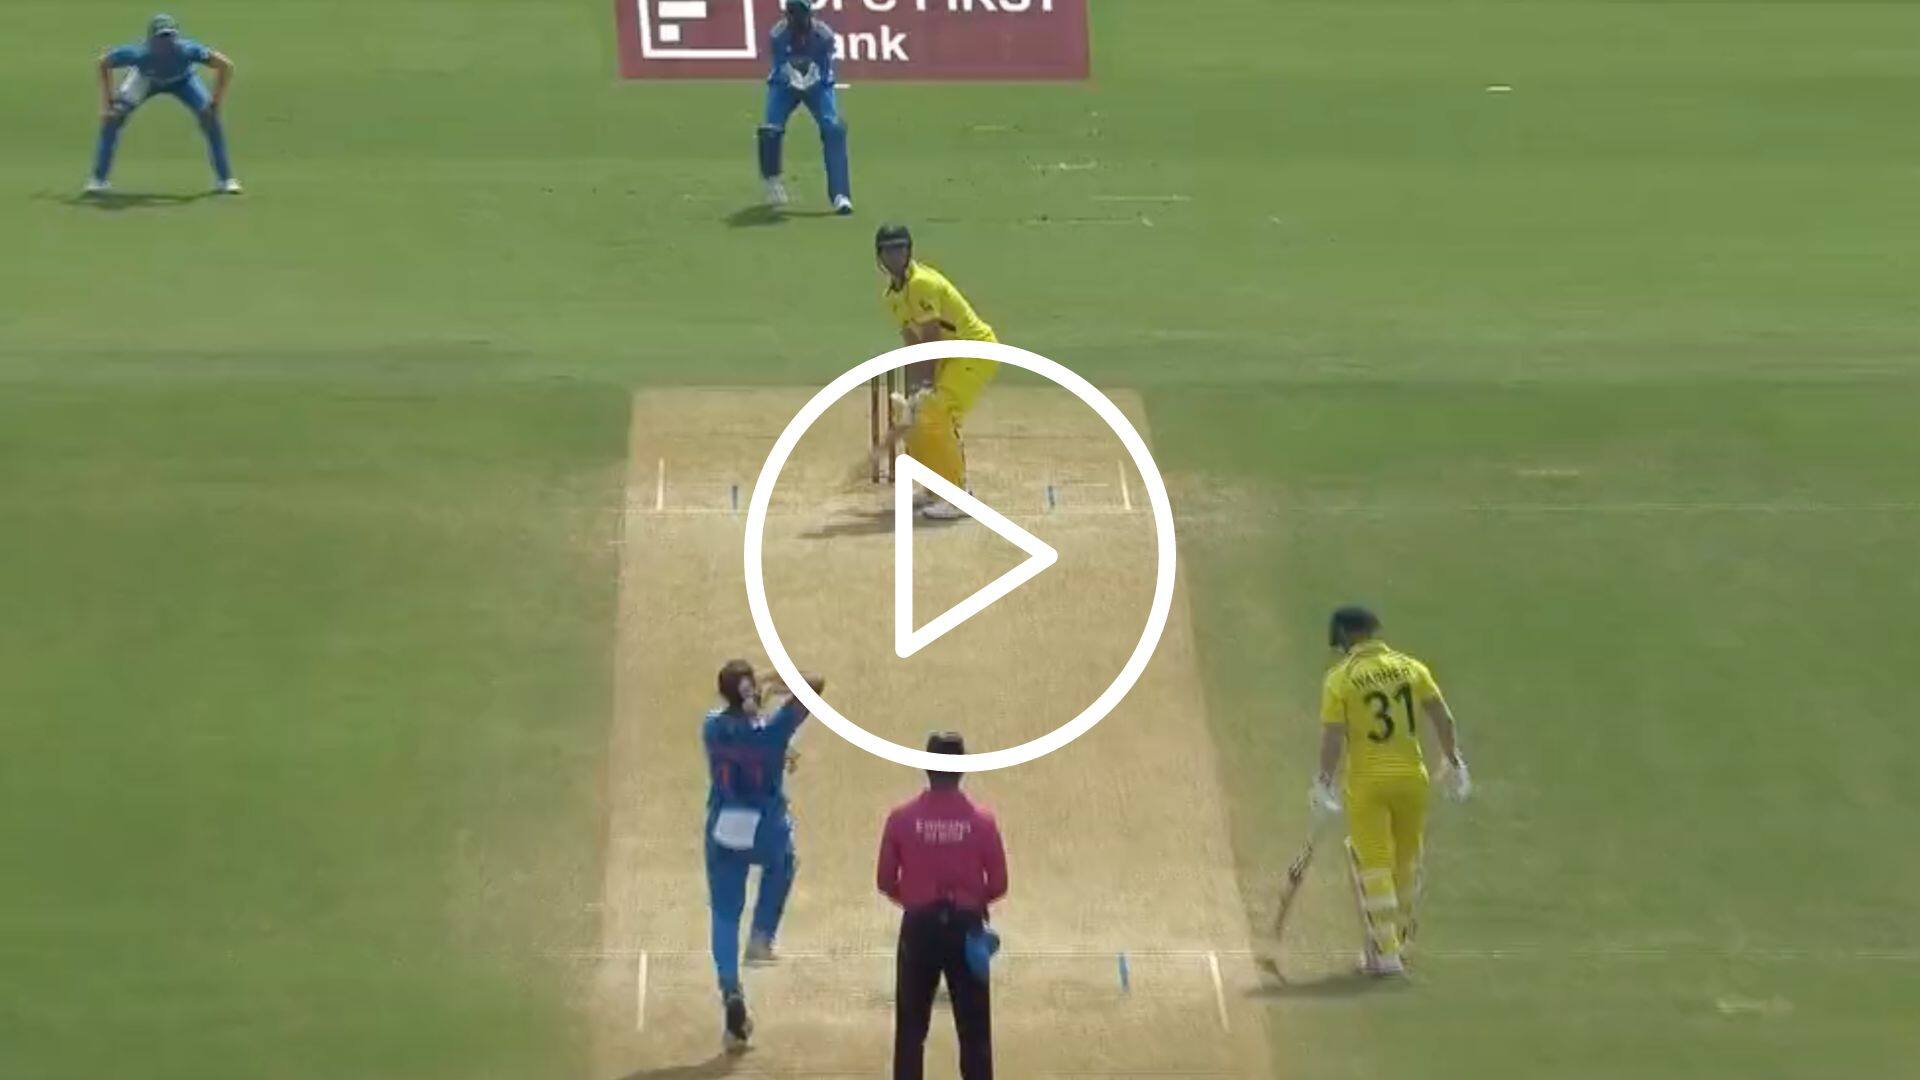 [Watch] Mohammed Shami Strikes Early, Gets Mitchell Marsh With A Beauty